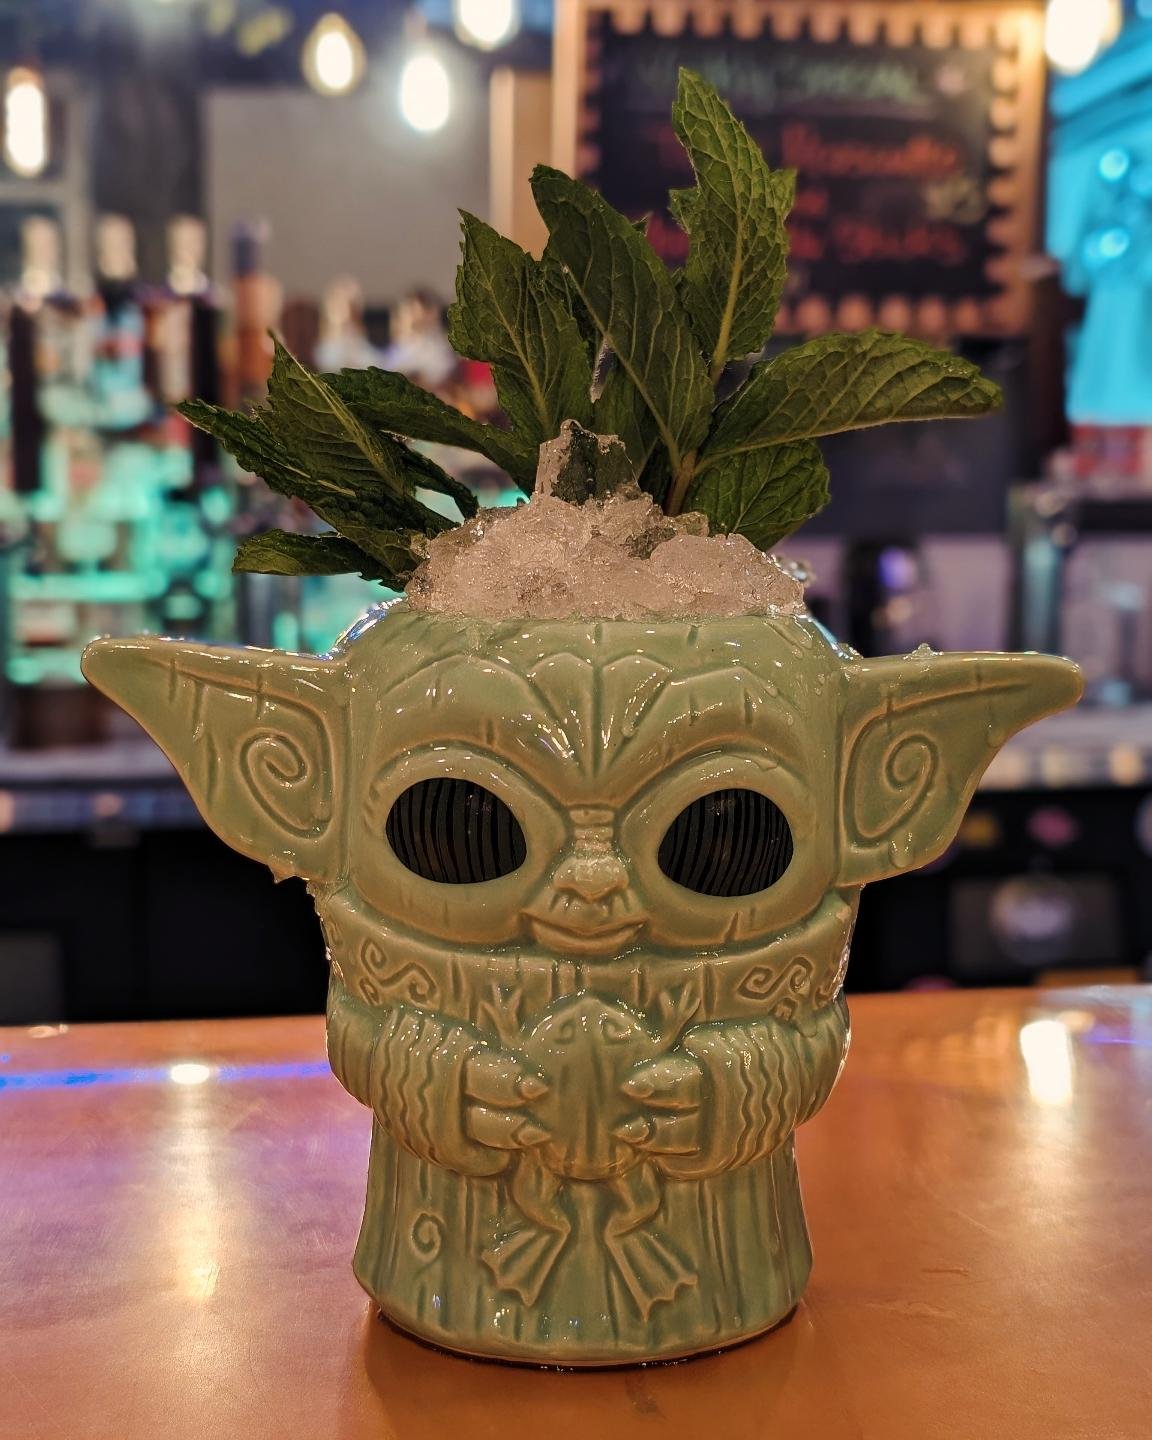 Is Grogu using the force on you? Pulling you in for Mint Julep specials starting today. May the 4th be Derby! (And the 3rd)